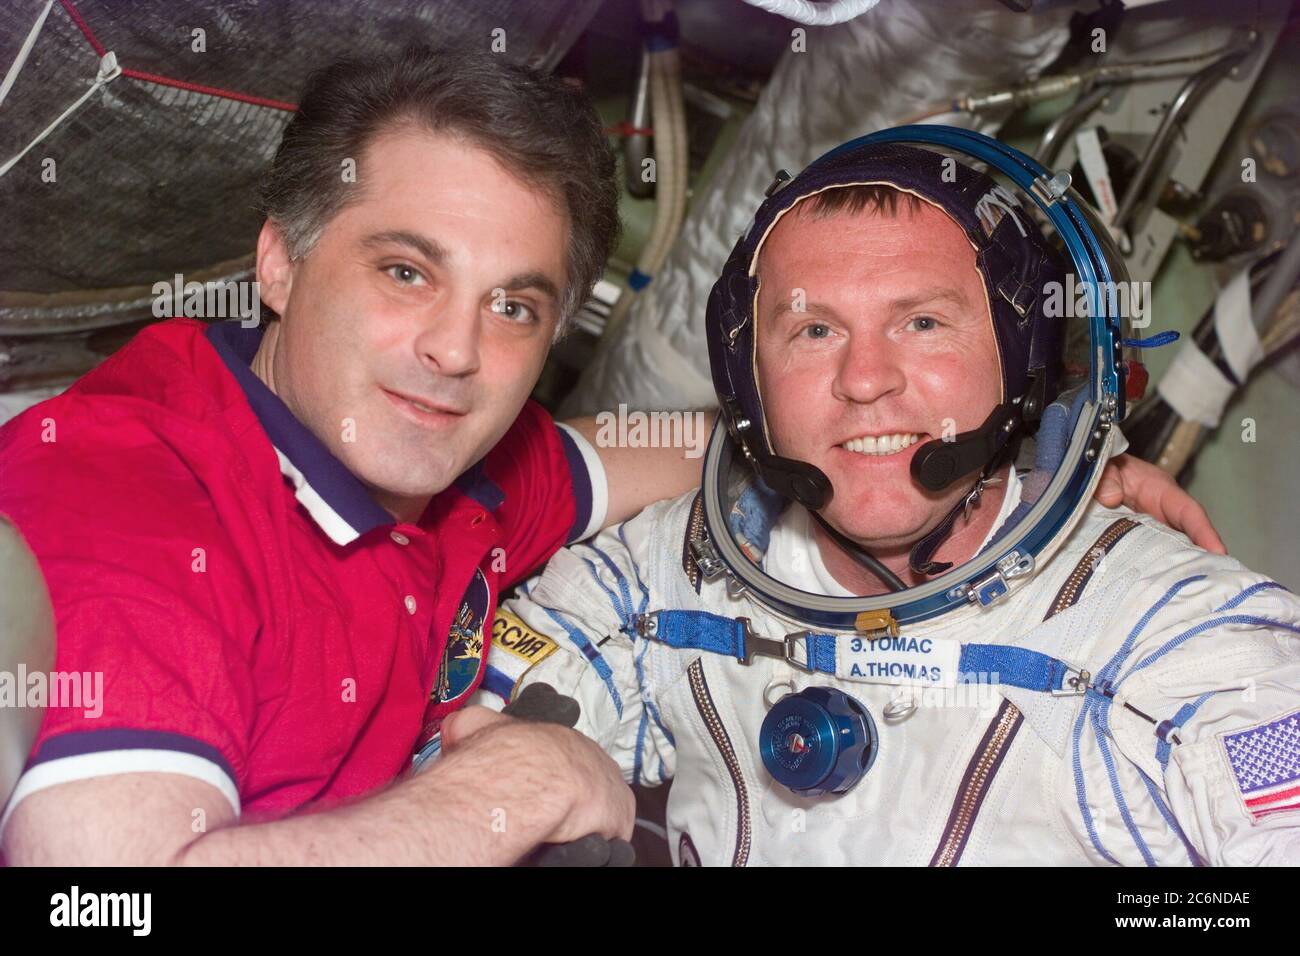 (26 Jan 1998) --- This Electronic Still Camera (ESC) image shows astronauts David A. Wolf and Andrew S. W. Thomas embracing after Thomas' second Russian Sokol spacesuit test, onboard the Russian Mir Space Station.  Thomas is to replace Wolf as cosmonaut guest researcher.  Upon Thomas' arrival to Mir he had problems with his Sokol suit, however, following suit modifications the suit fit properly.  Thomas will be the last American astronaut to serve a tour onboard Mir.  This ESC view was taken on January 26, 1998, at 12:56:15 MET. Stock Photo